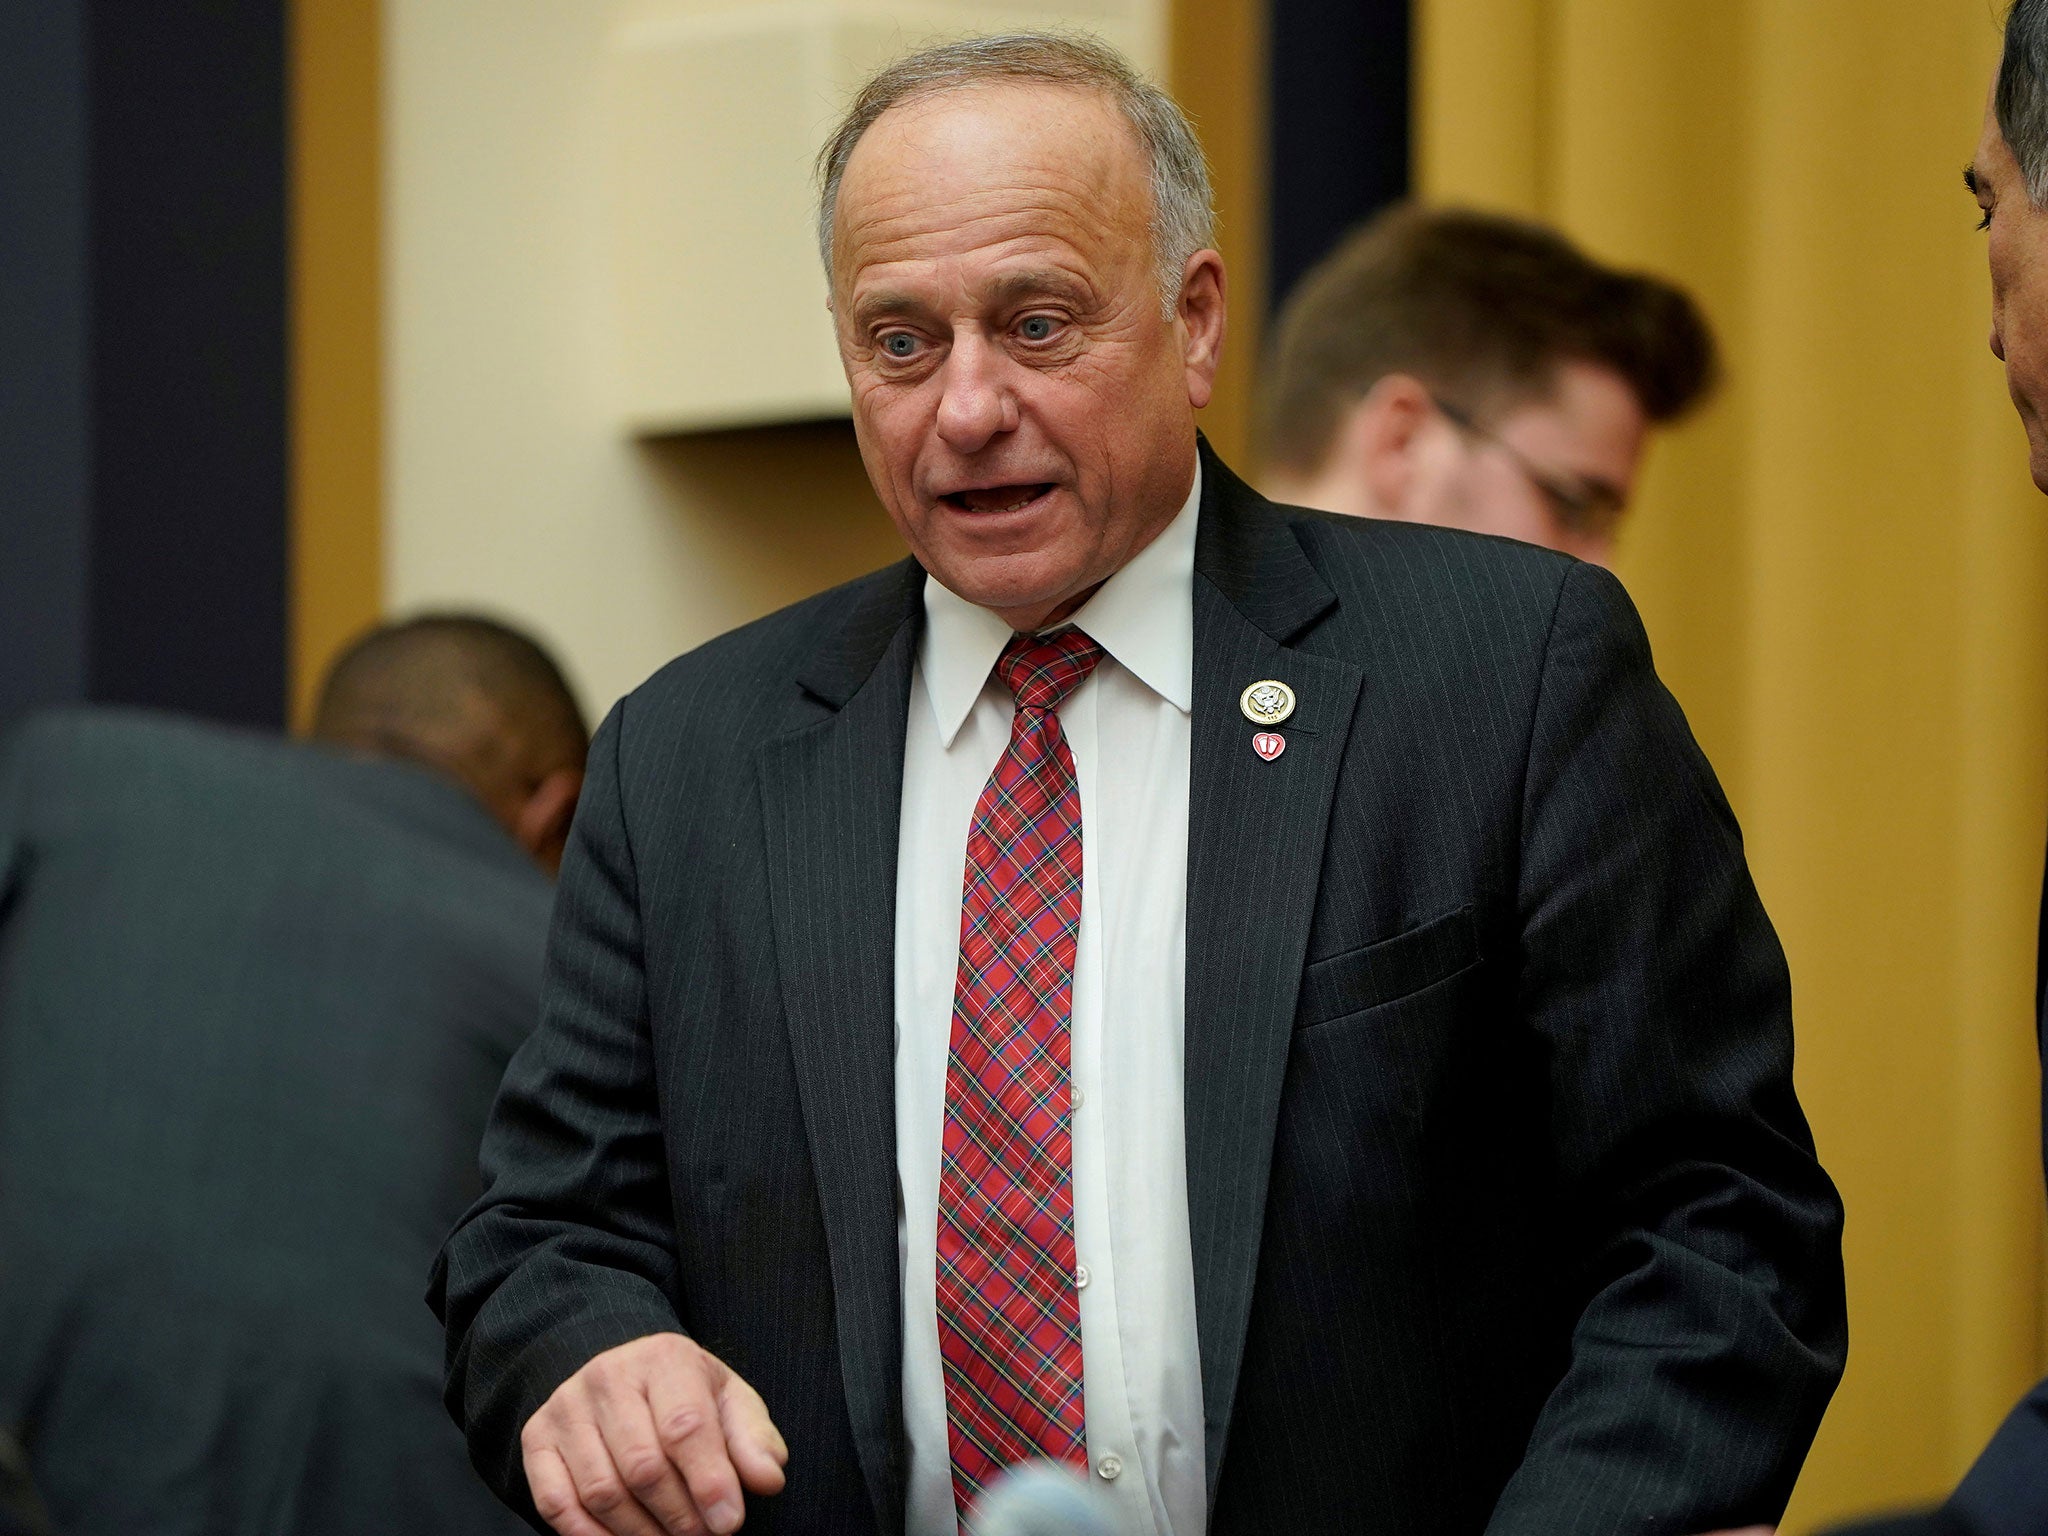 Republican congressman Steve King has been widely denounced for his recent comments on white supremacy